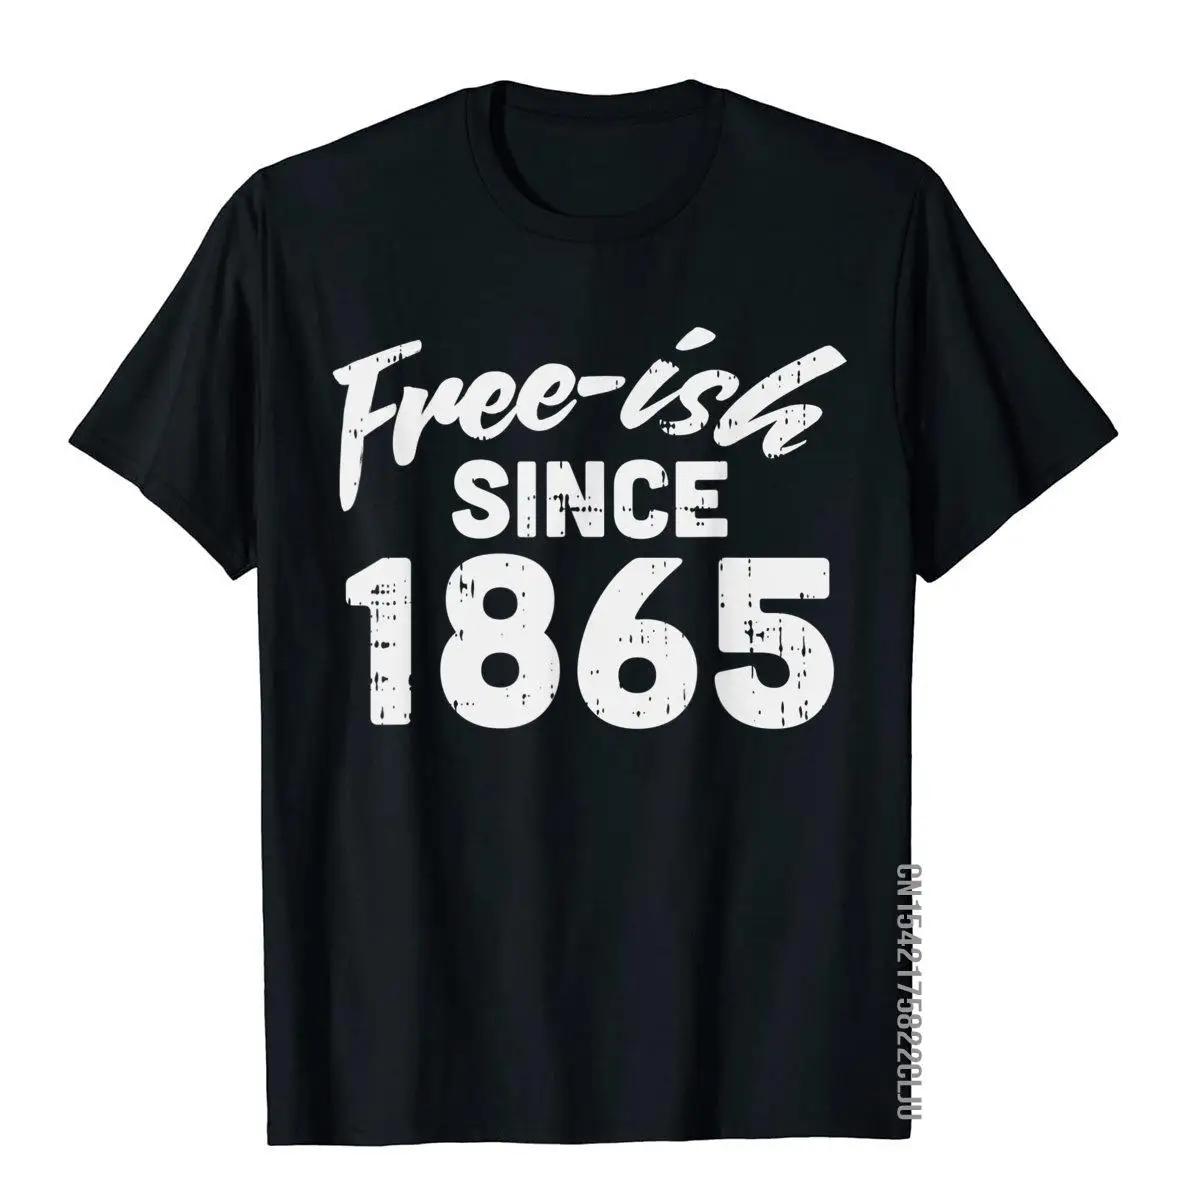 

Freeish Since 1865 Shirt Black History Month Pride Protest T-Shirt Tops Tees Plain Printing Cotton Adult Top T-Shirts Normcore